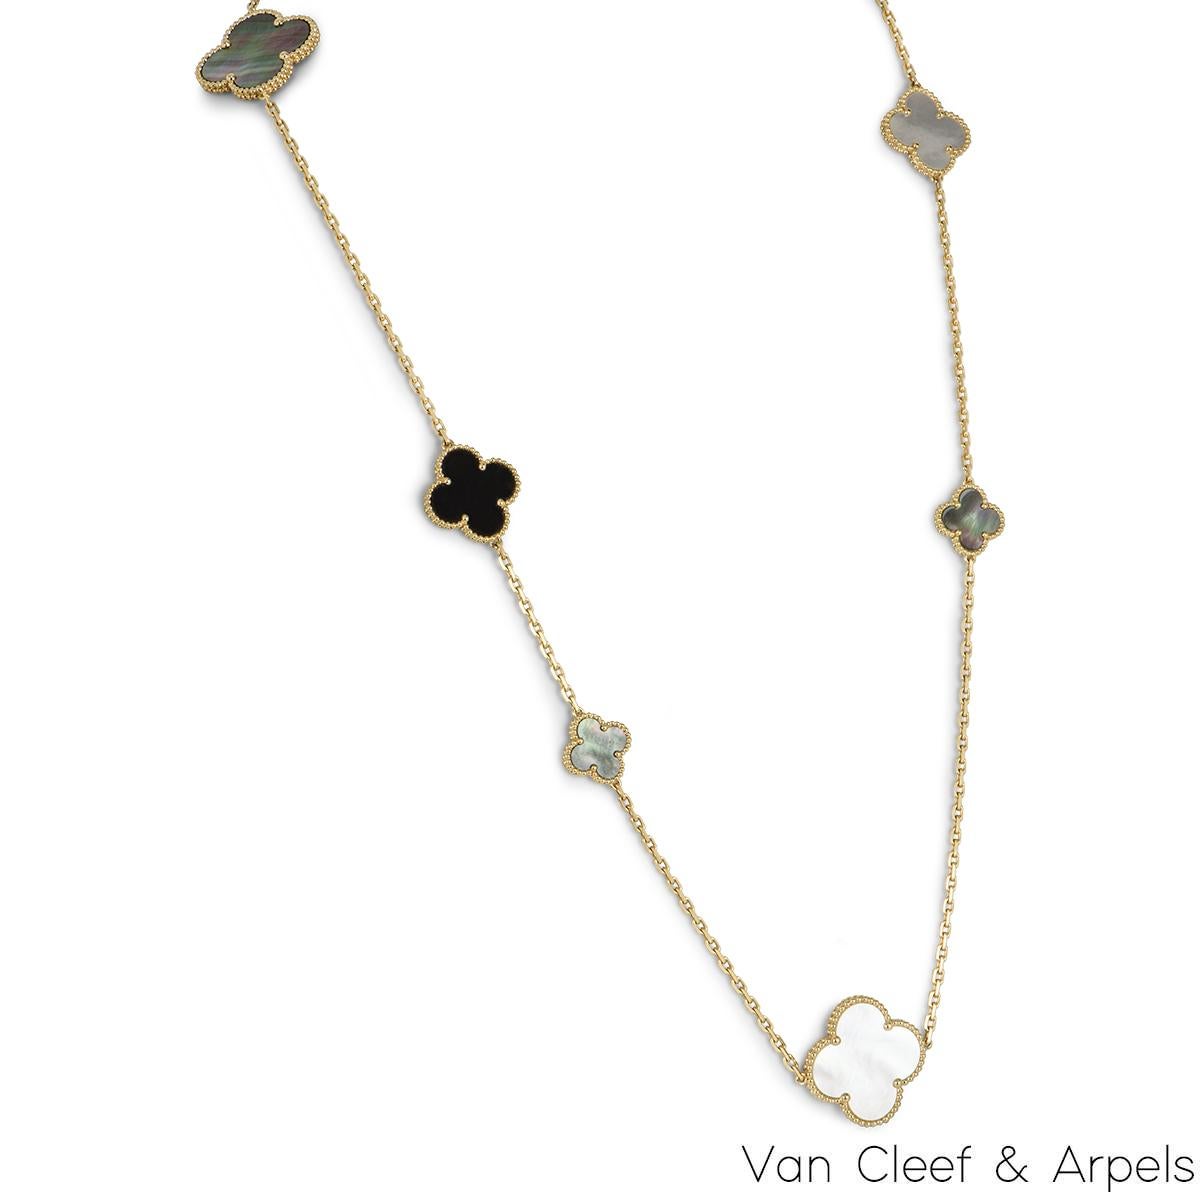 An iconic 18k yellow gold Van Cleef & Arpels necklace from the Magic Alhambra collection. The necklace comprises of 16 iconic 4 leaf clover motifs alternating in size, set with onyx, grey and white mother of pearl inlays complemented by a beaded